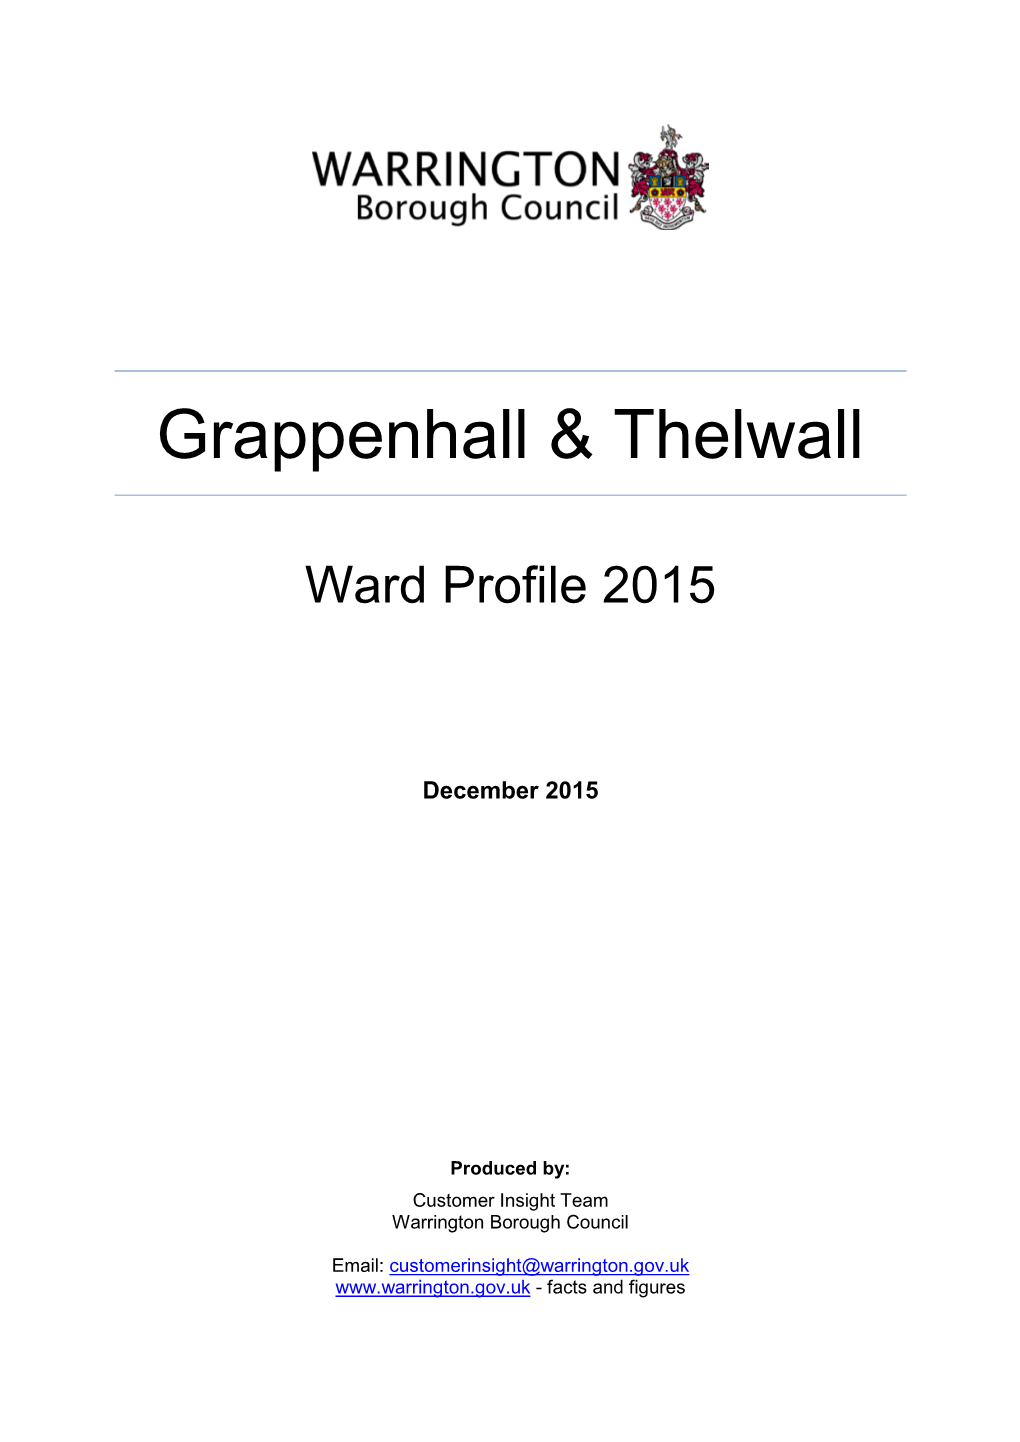 Grappenhall & Thelwall